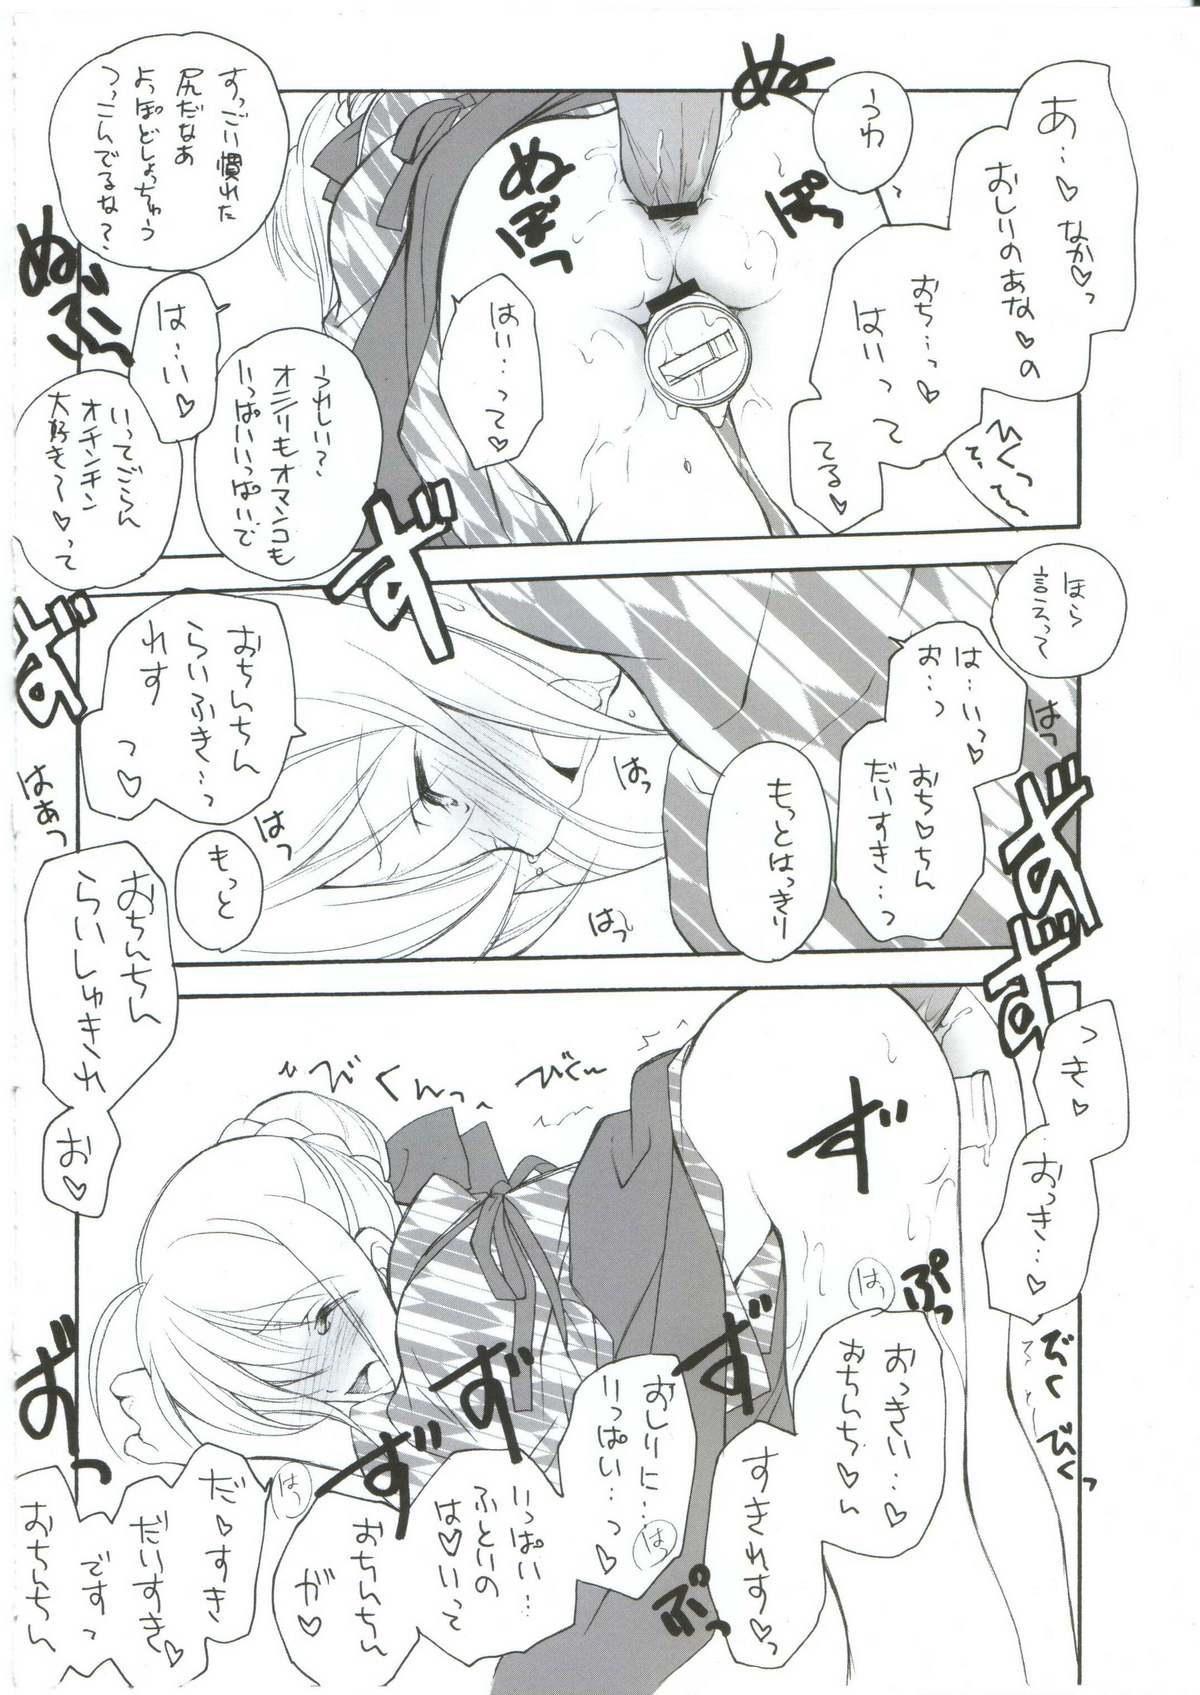 Masterbate Citron Ribbon 9 - Fate stay night Groping - Page 7